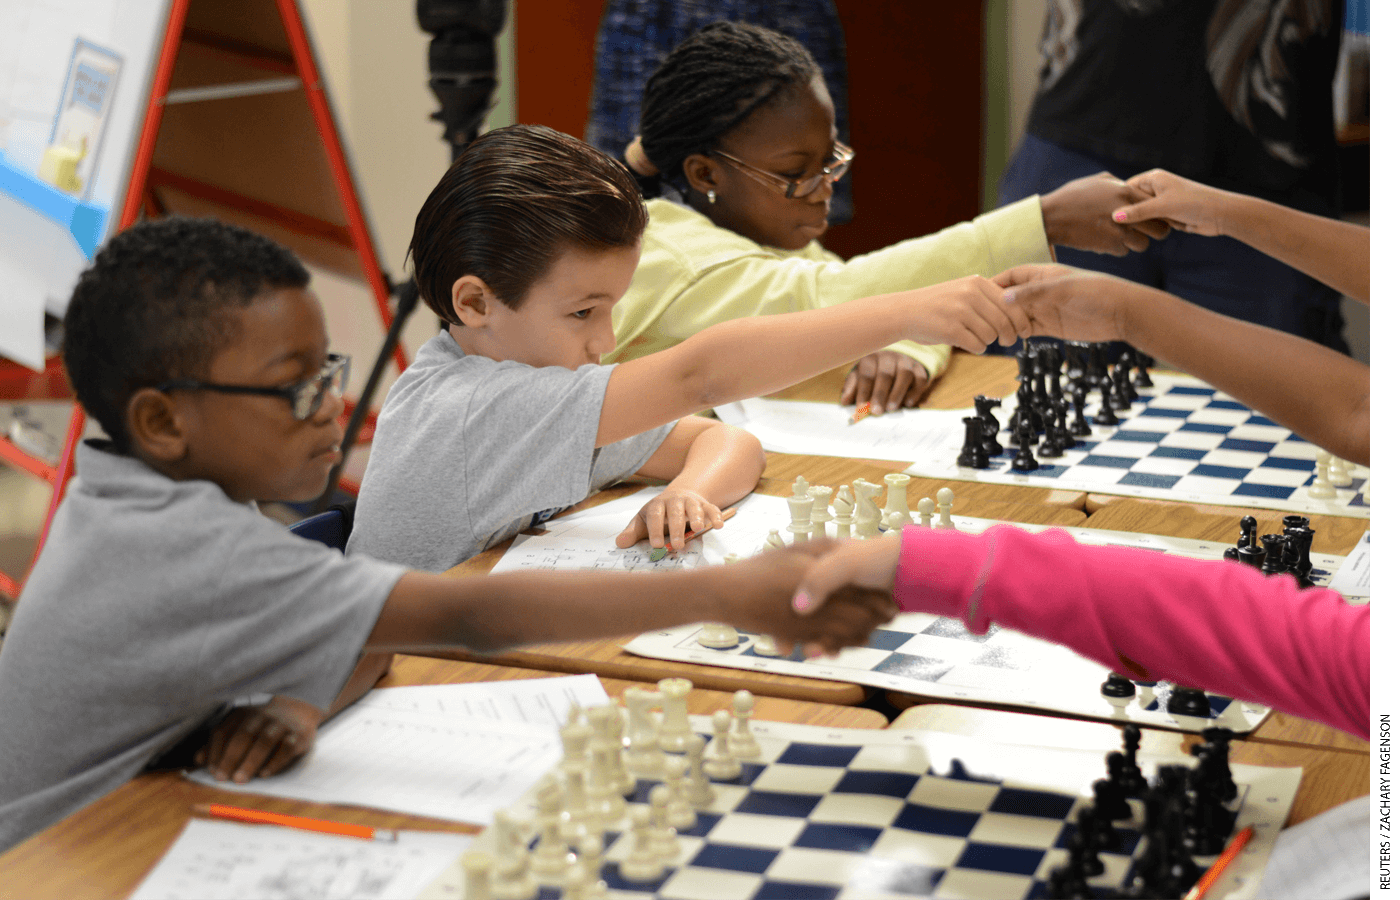 Schools can foster student connections by providing open-ended opportunities for young people to engage. Activities might include playing games, such as chess, between classes.